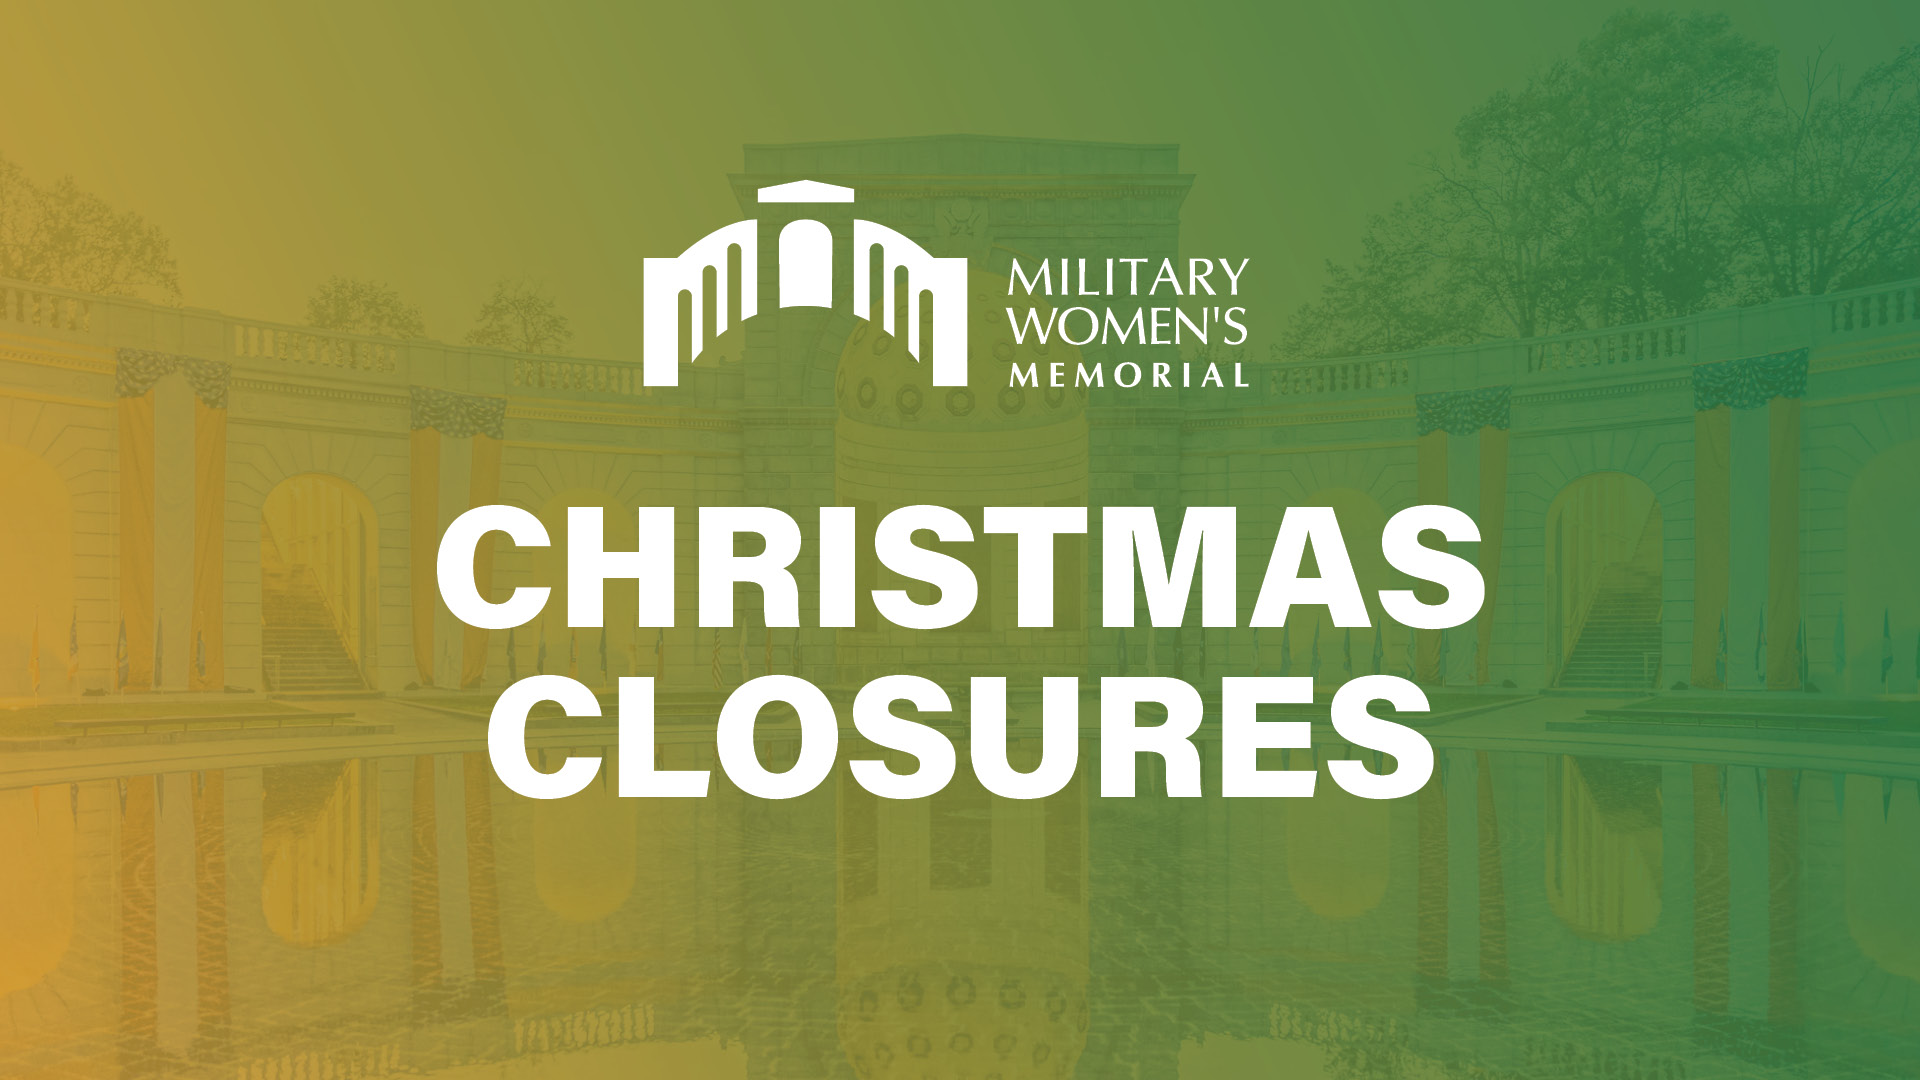 Christmas closures on green background